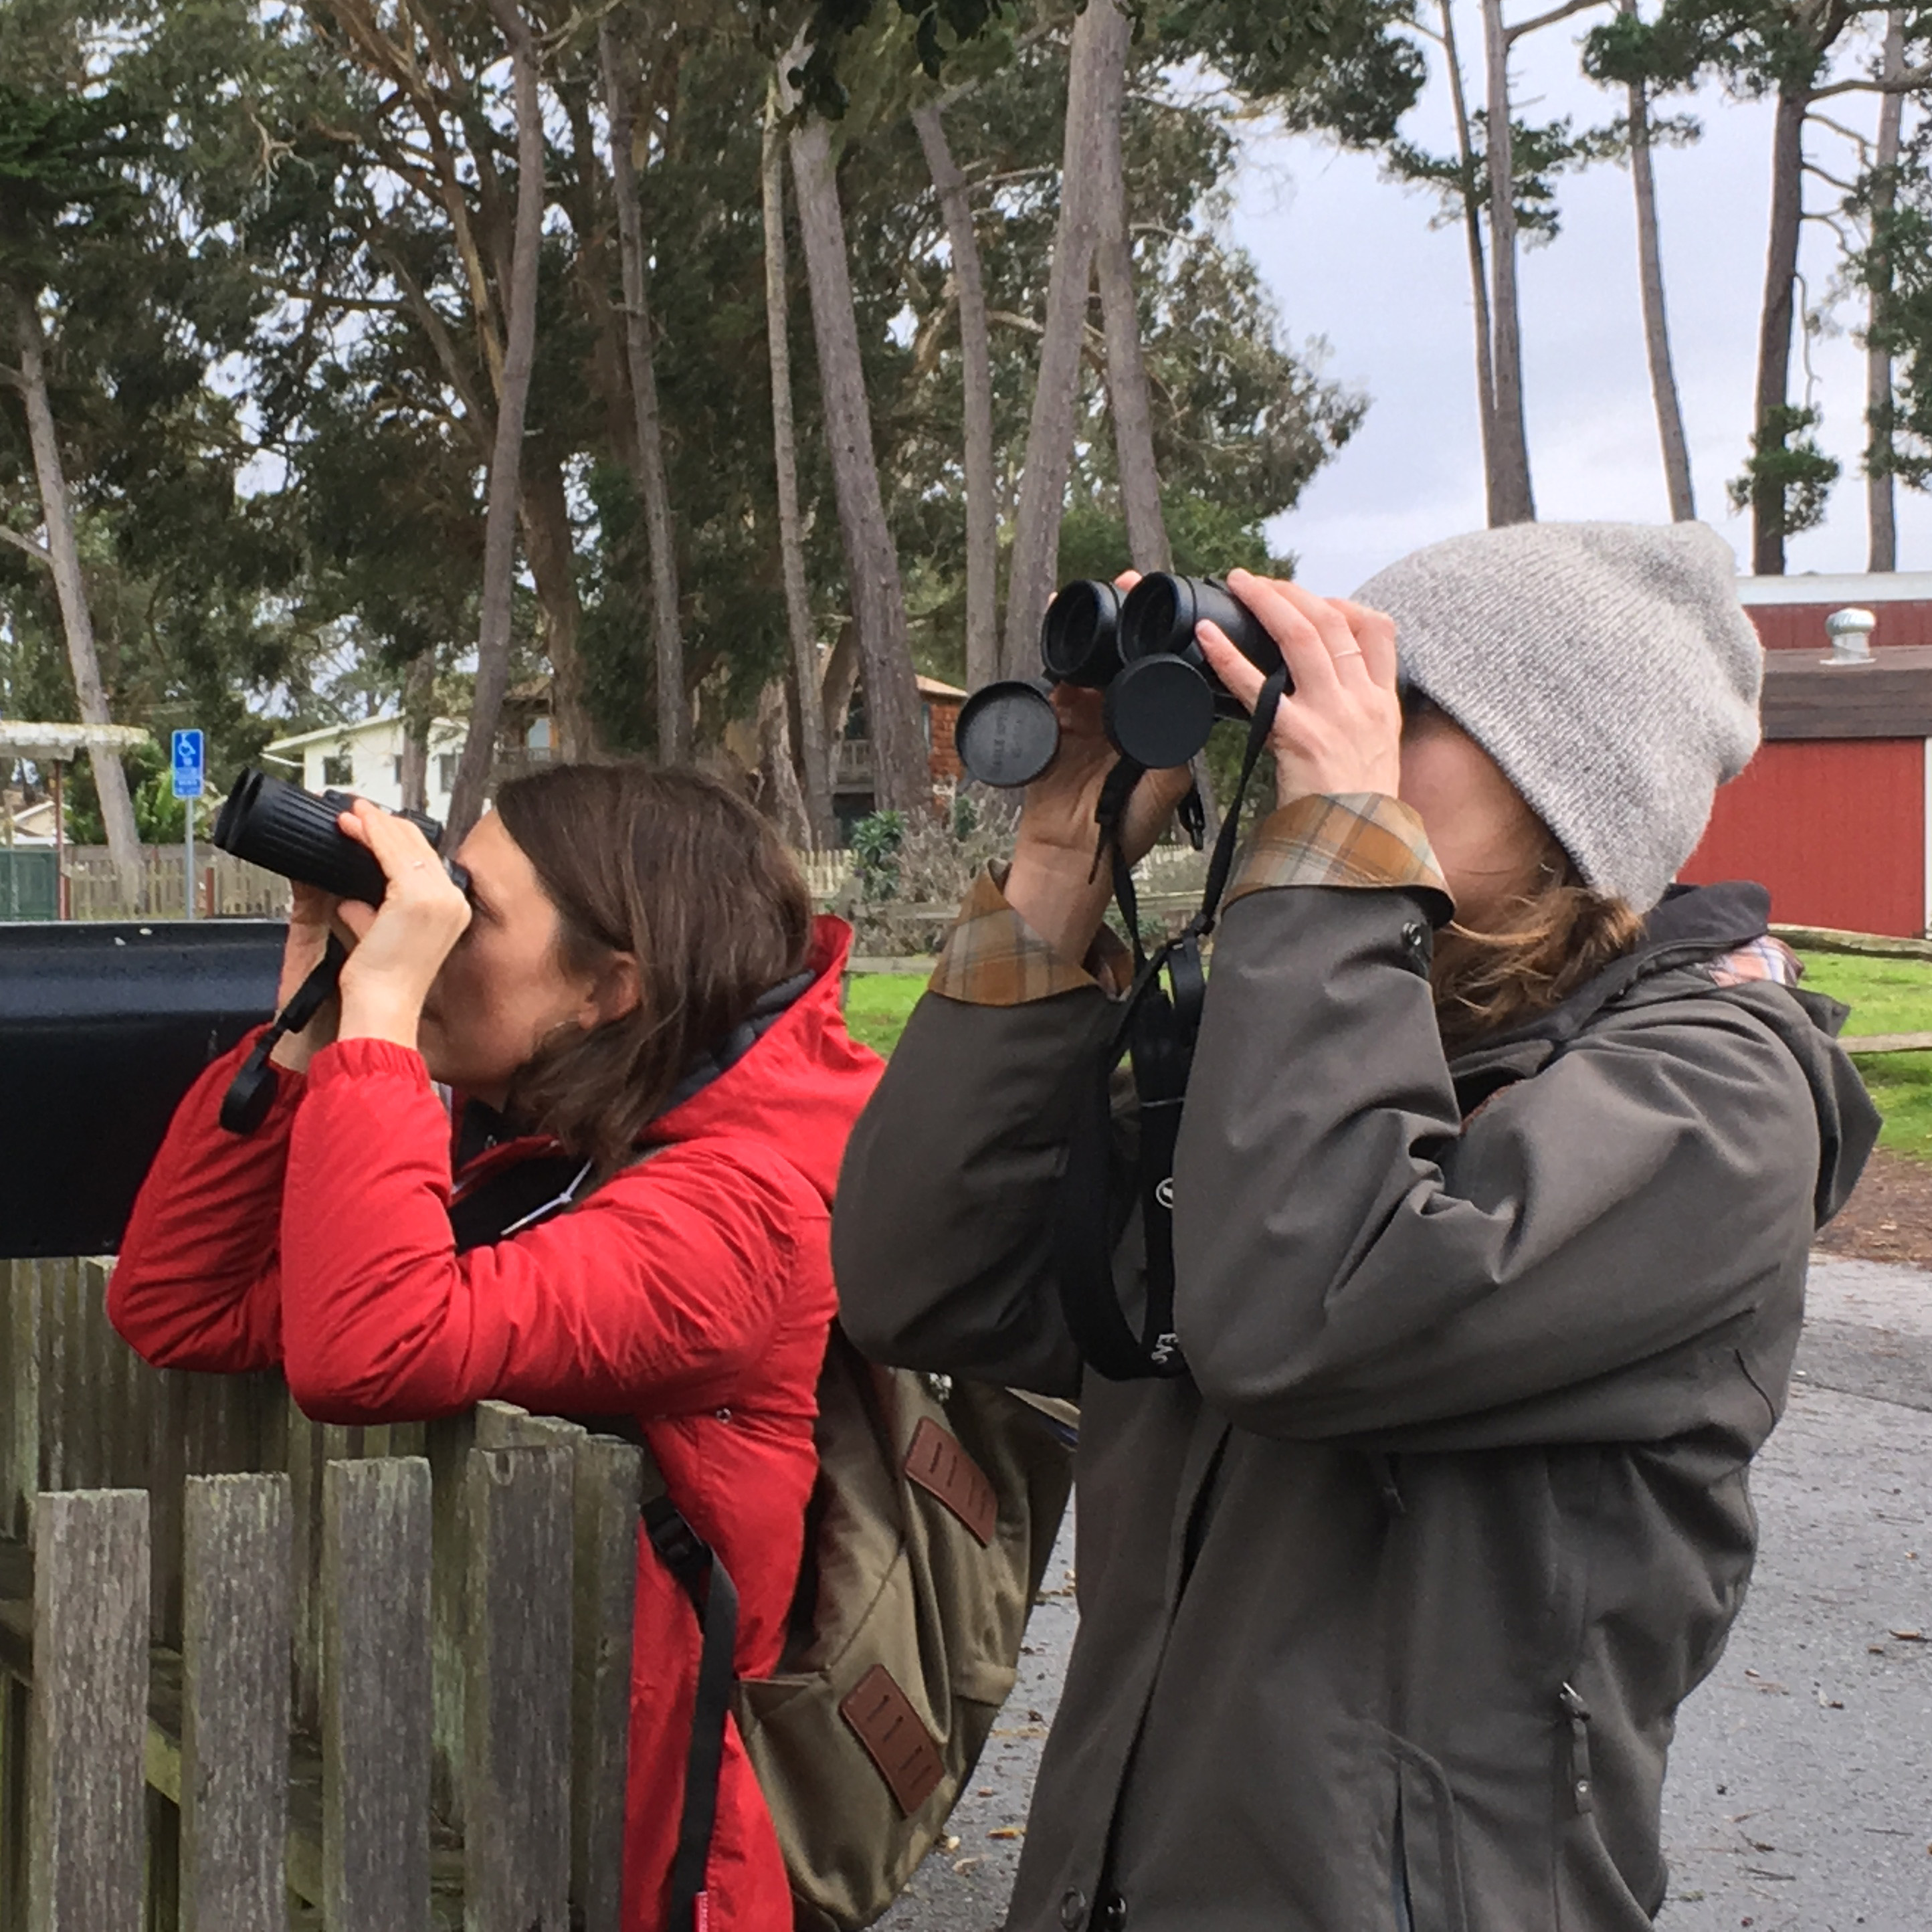 Two women wearing coats, one with a knit hat, are looking through binoculars at monarchs (outside the frame).